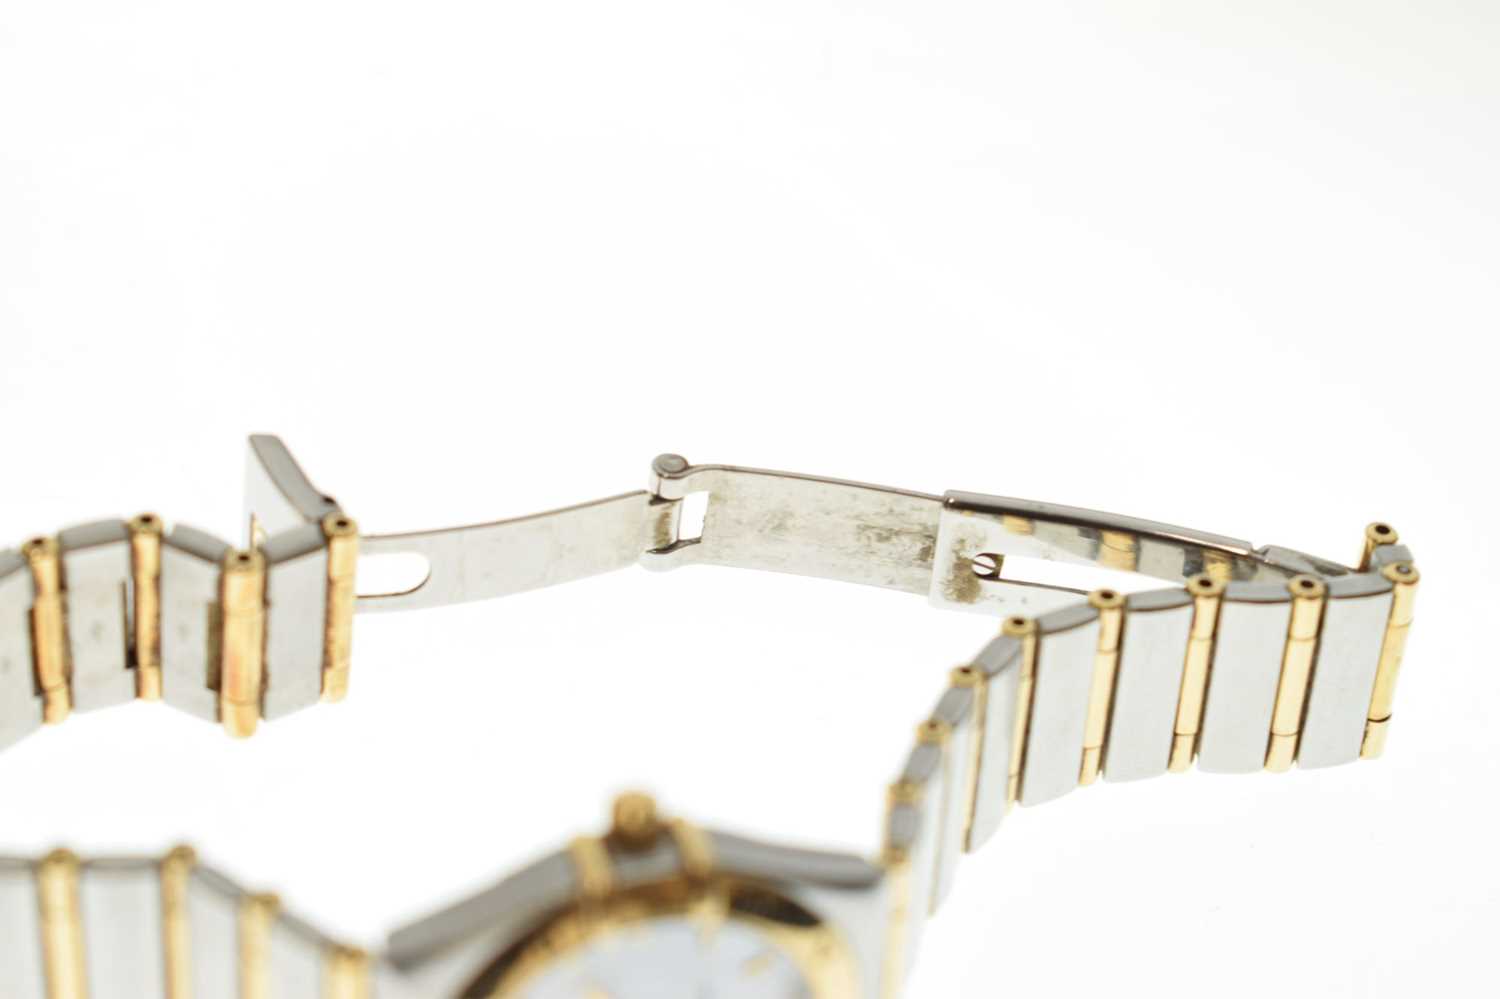 Omega - Lady's Constellation two-tone watch - Image 7 of 11